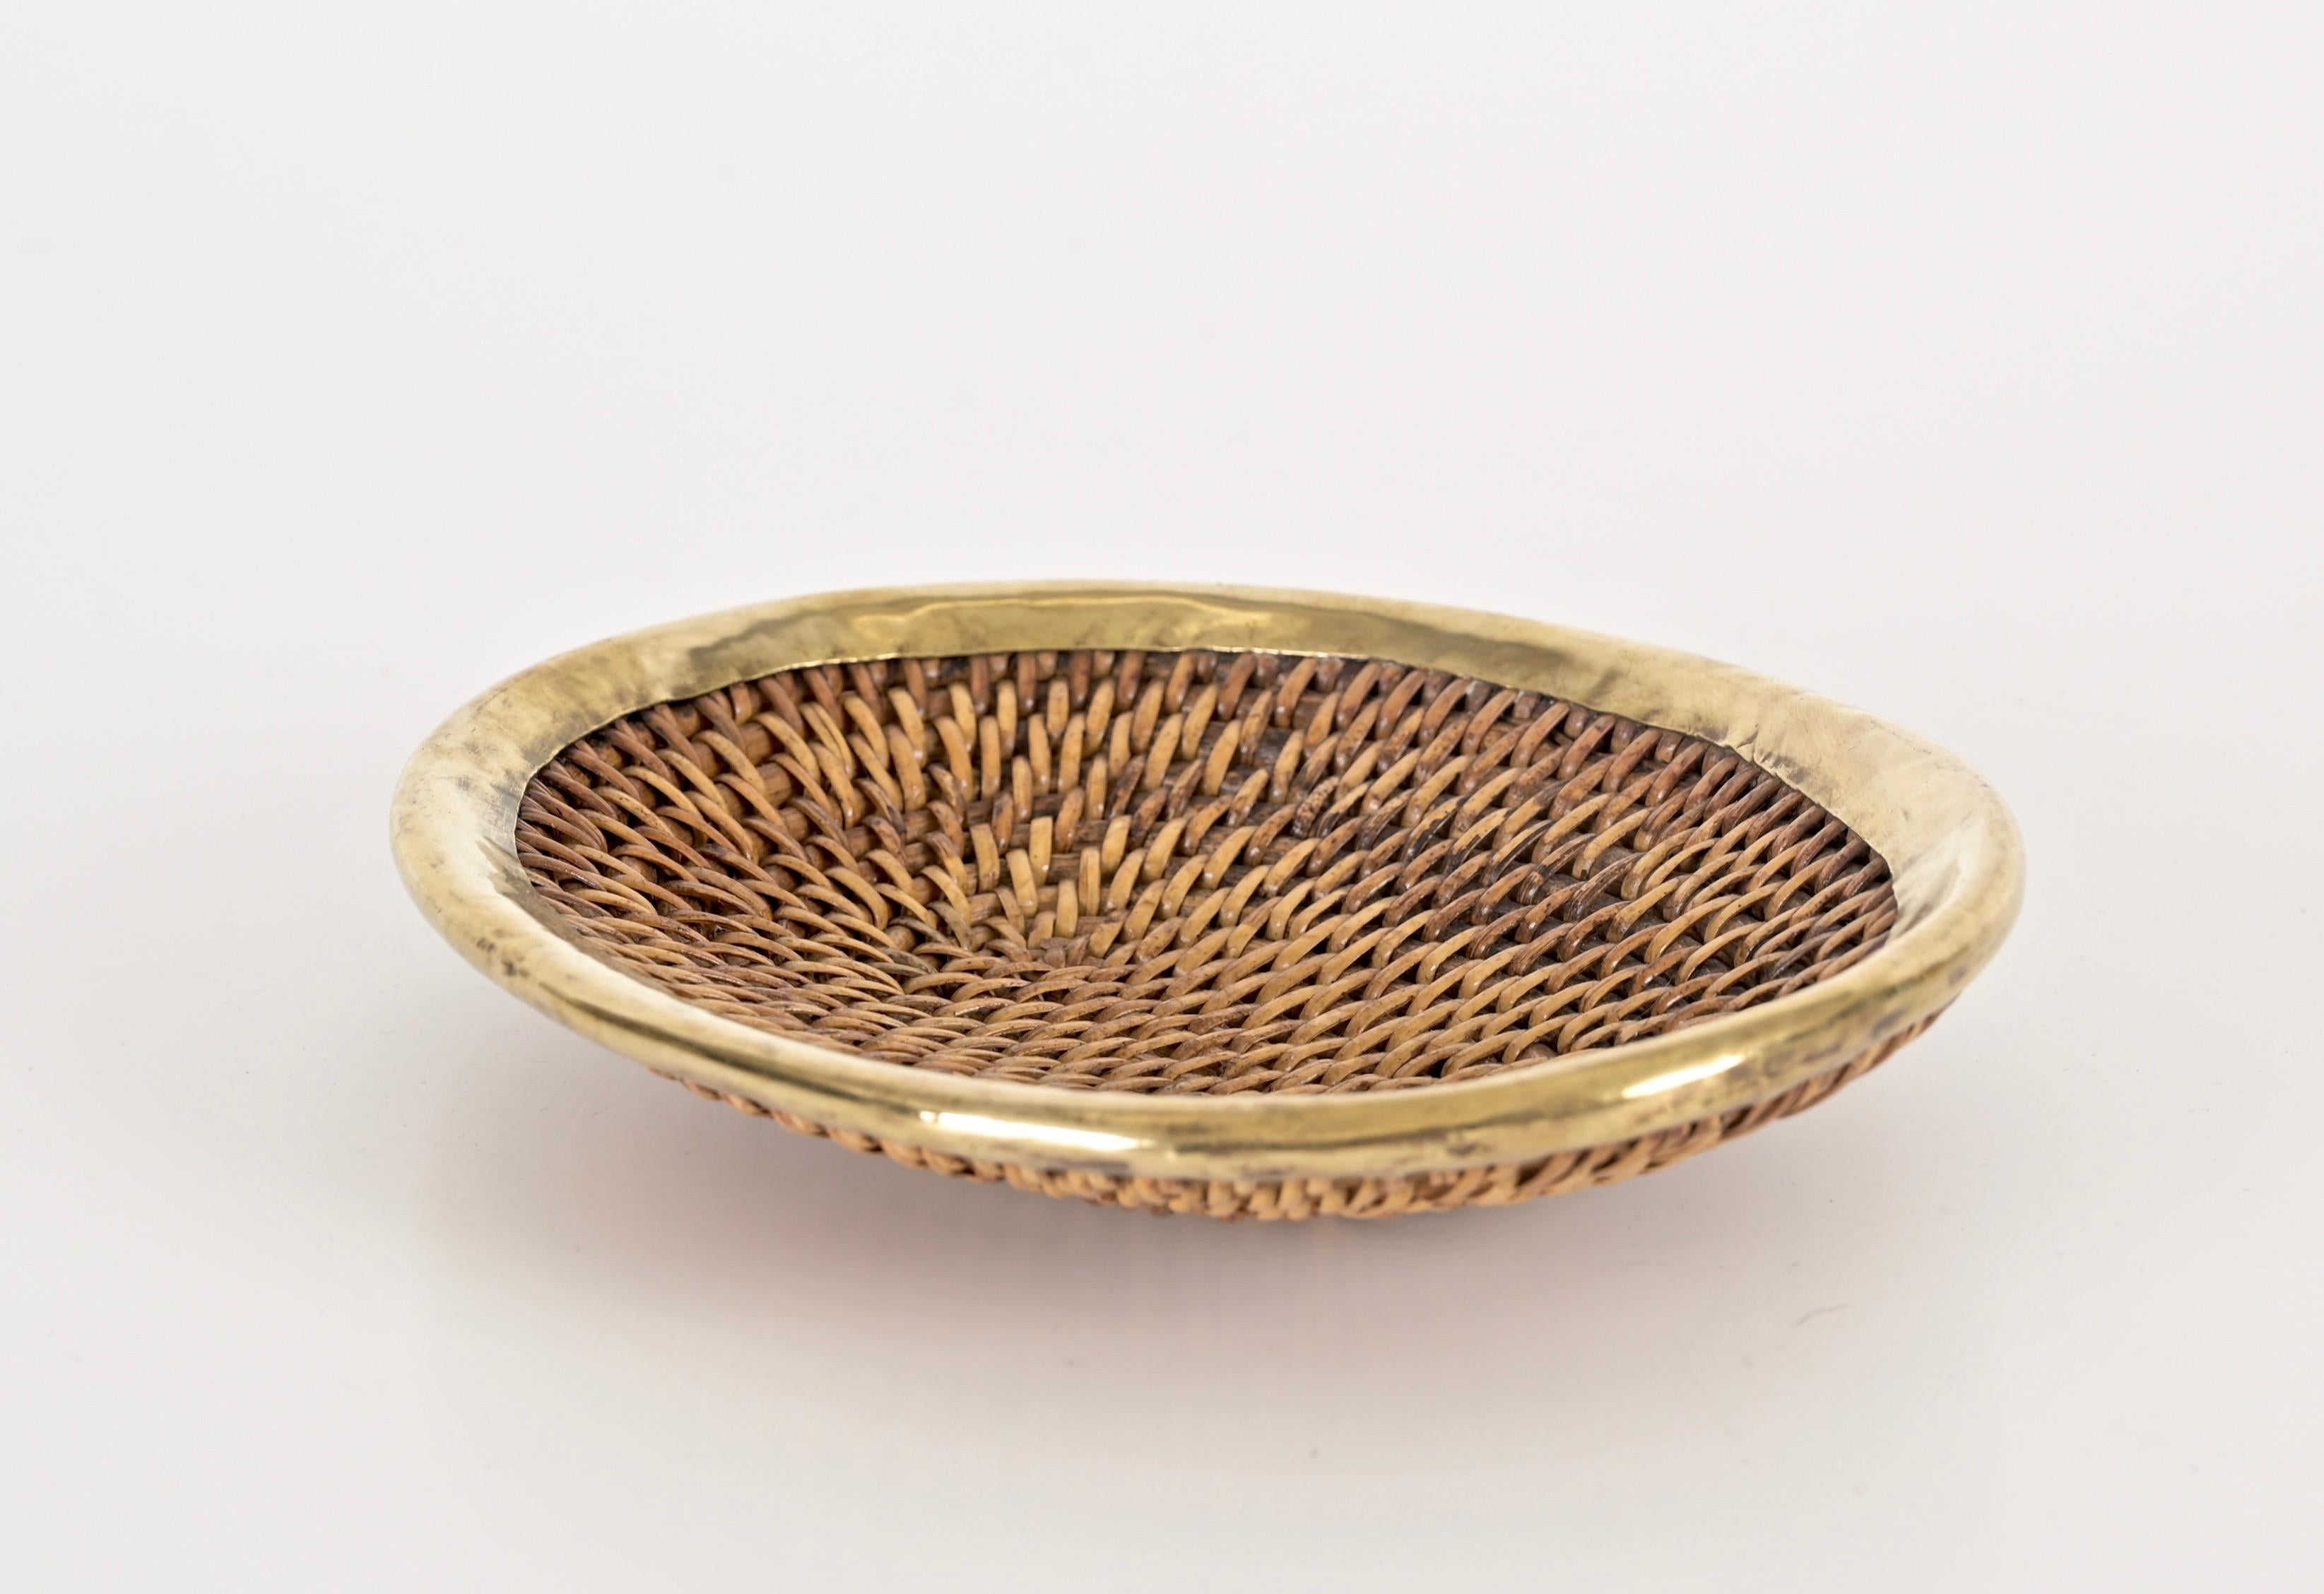 French Riviera Vide-Poche Bowl Tray in Woven Rattan and Brass, Italy 1970s For Sale 3